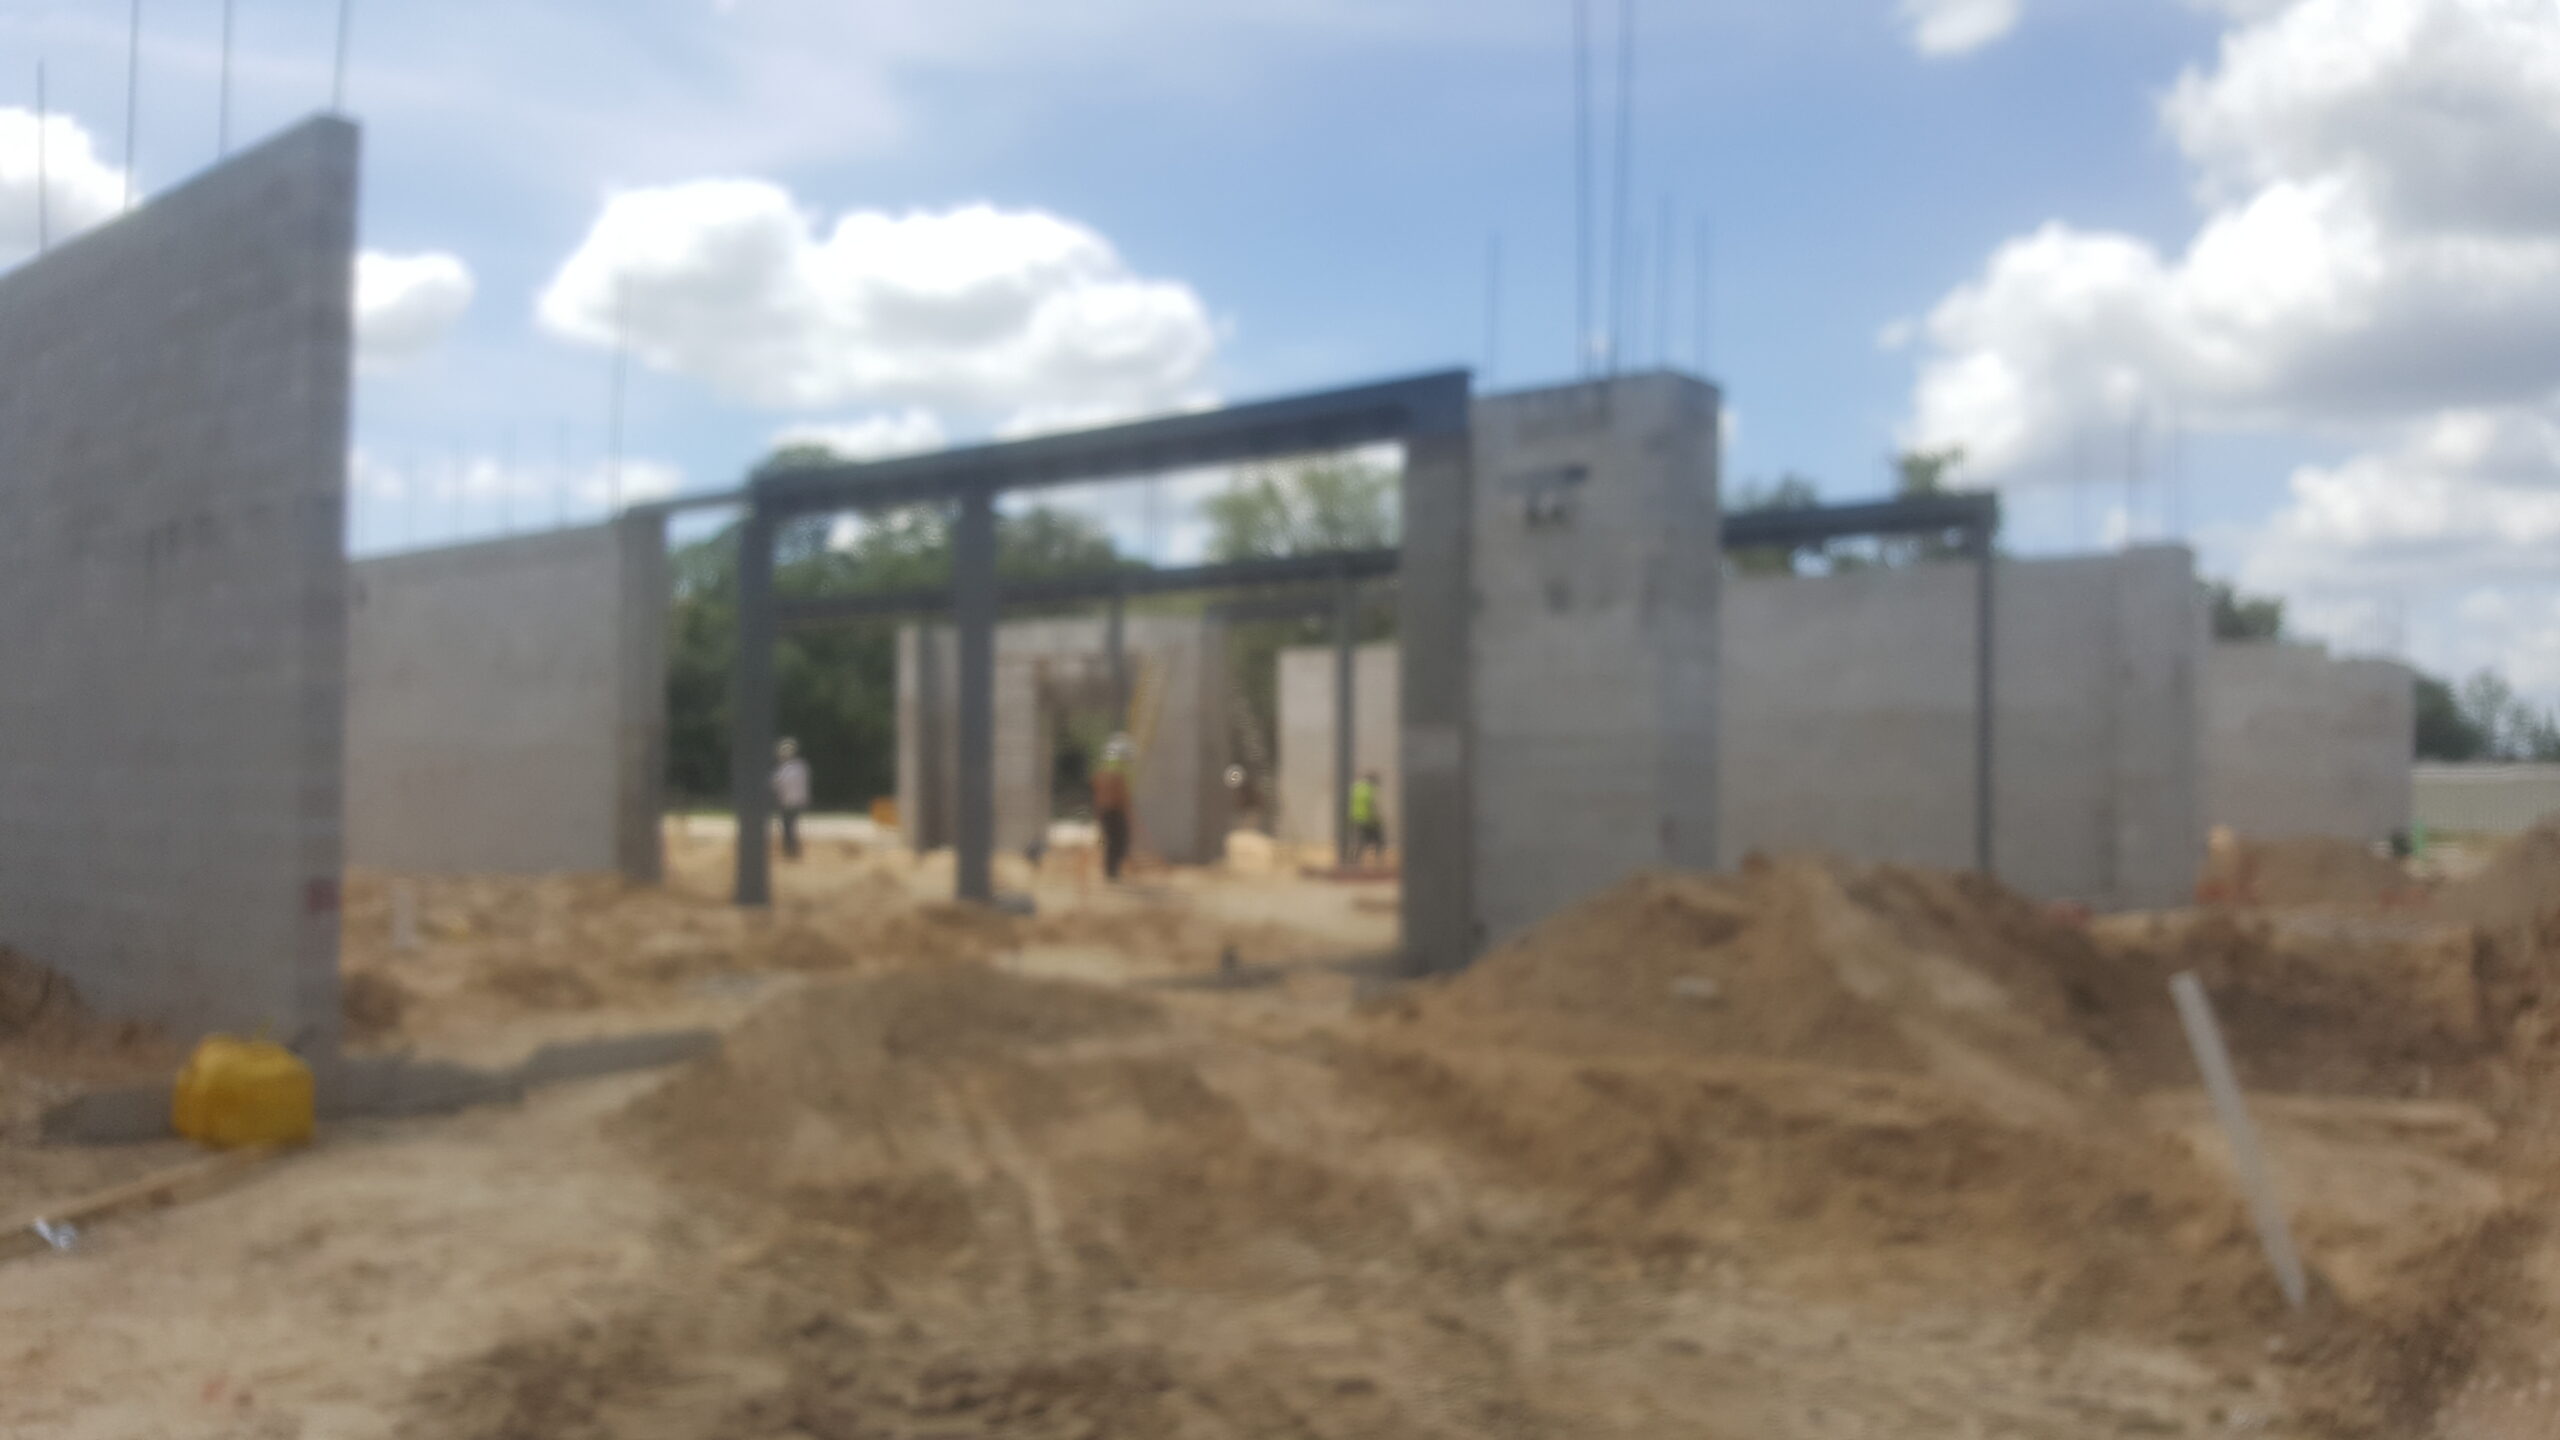 A blurry photo of a construction site where an entrance is being built